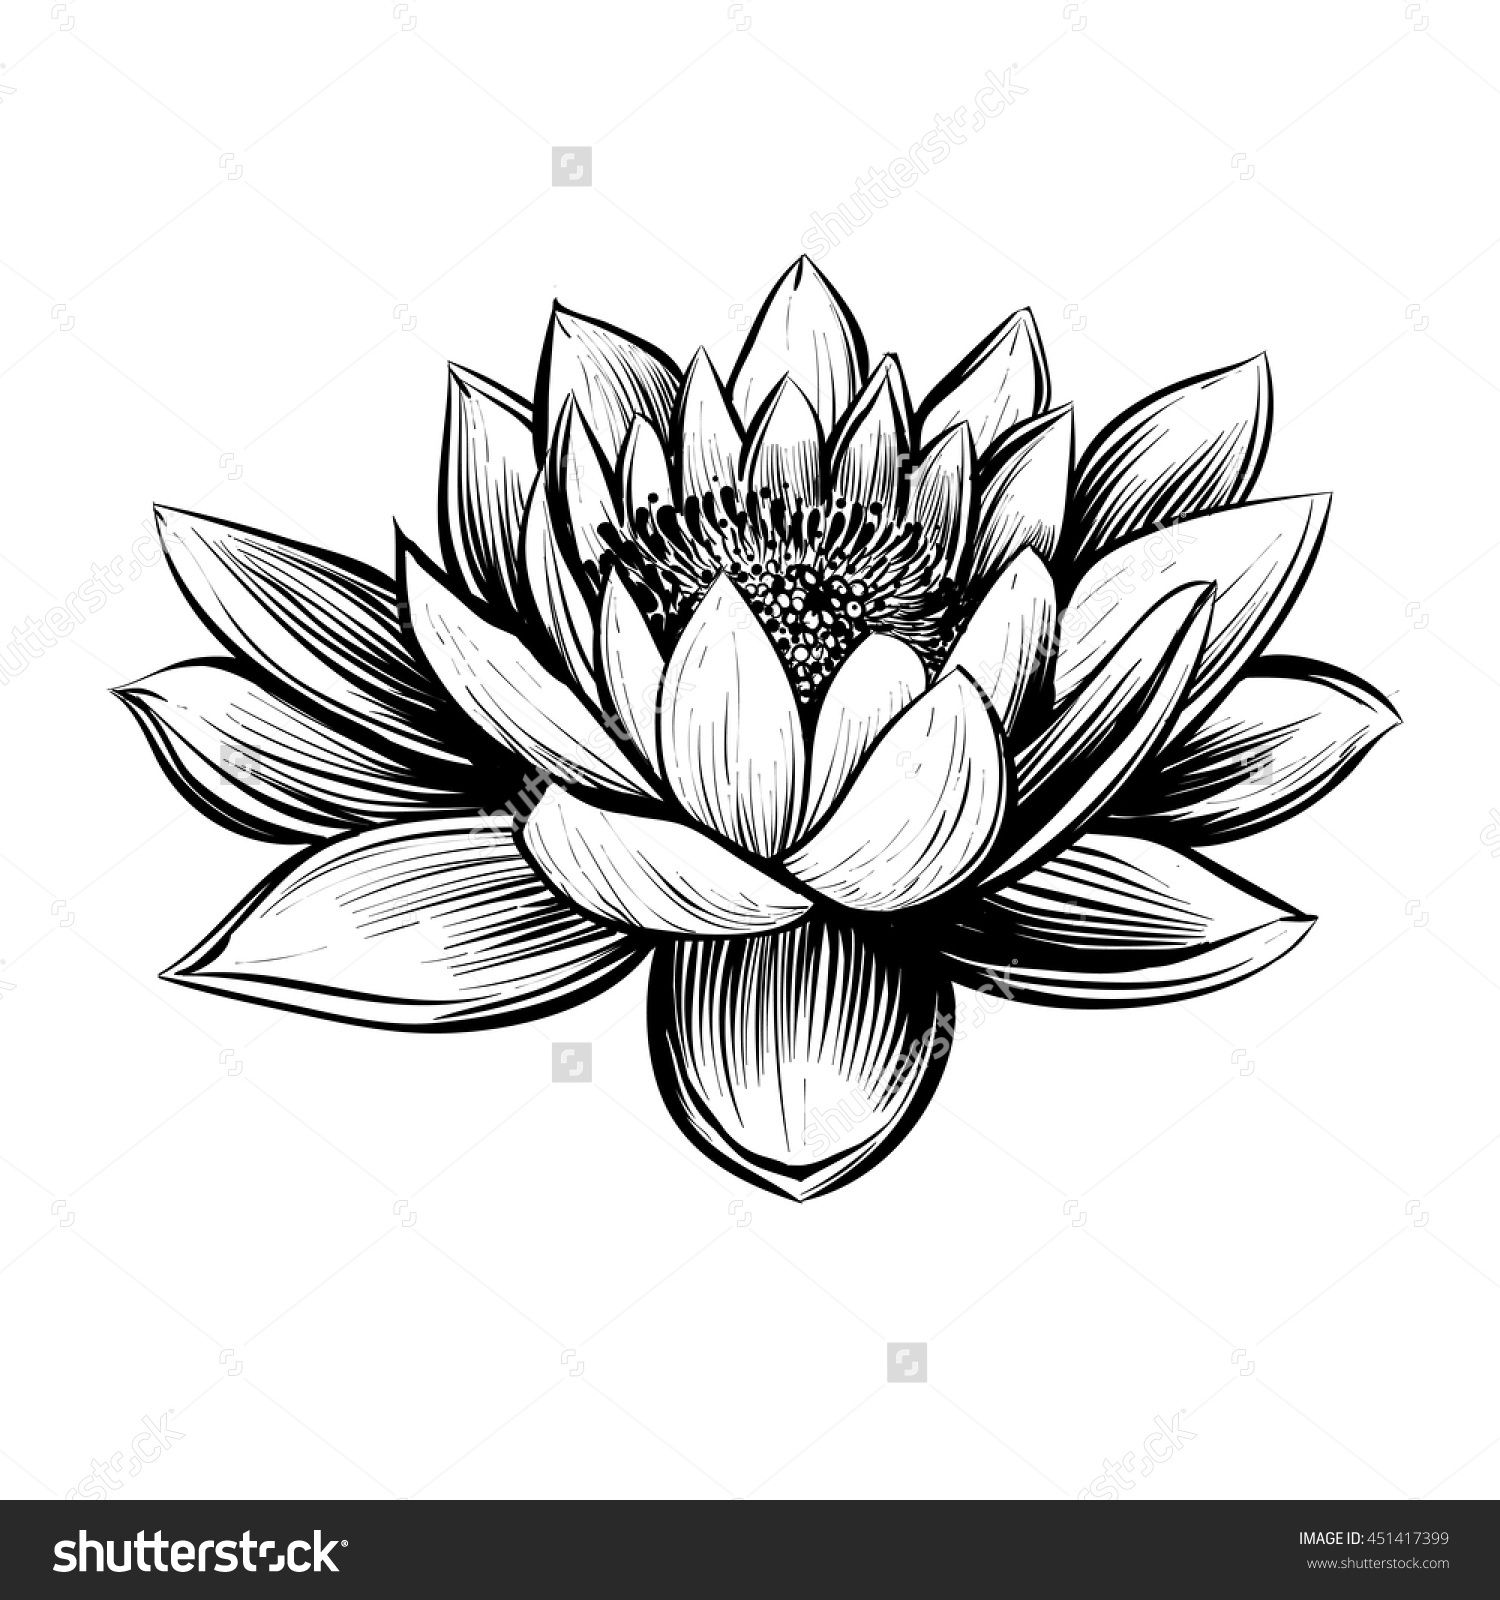 stock-vector-vector-water-lily-lotus-illustration-black-and-white ...